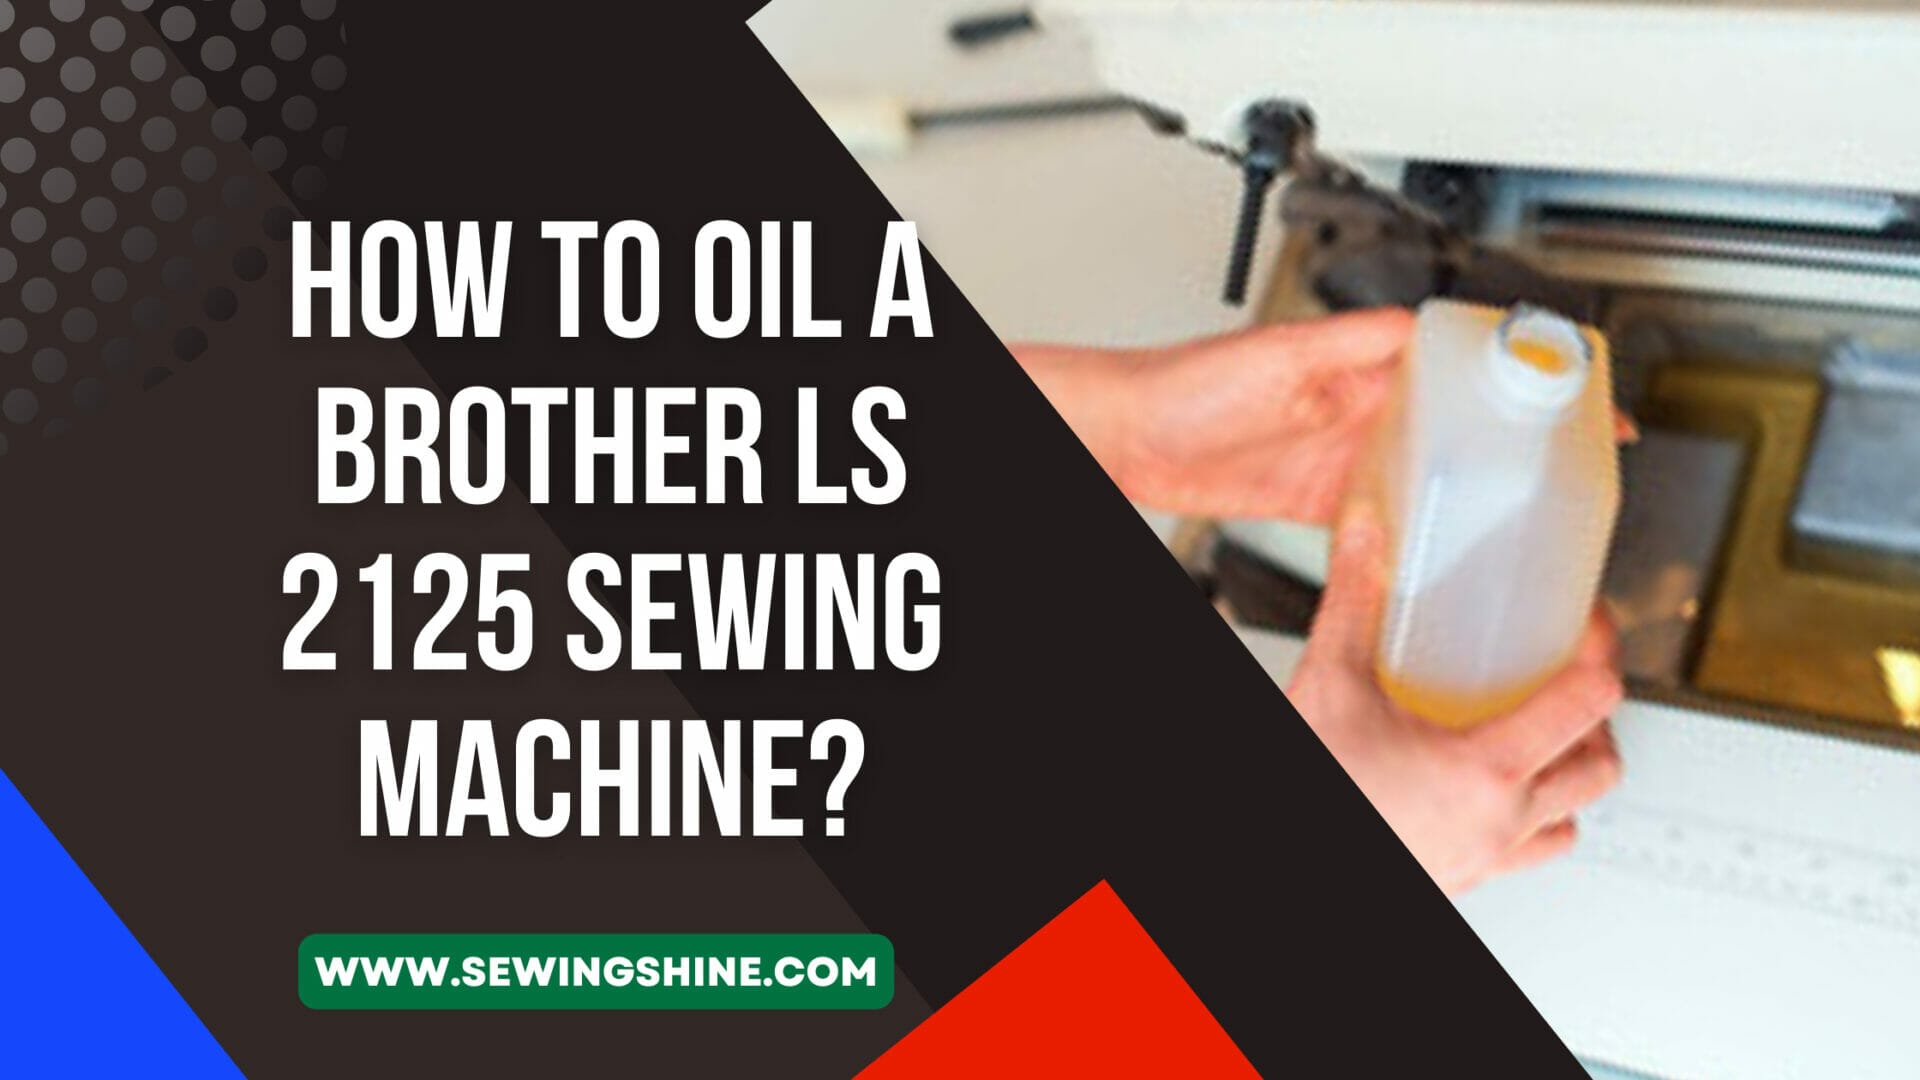 Oil A Brother Ls 2125 Sewing Machine